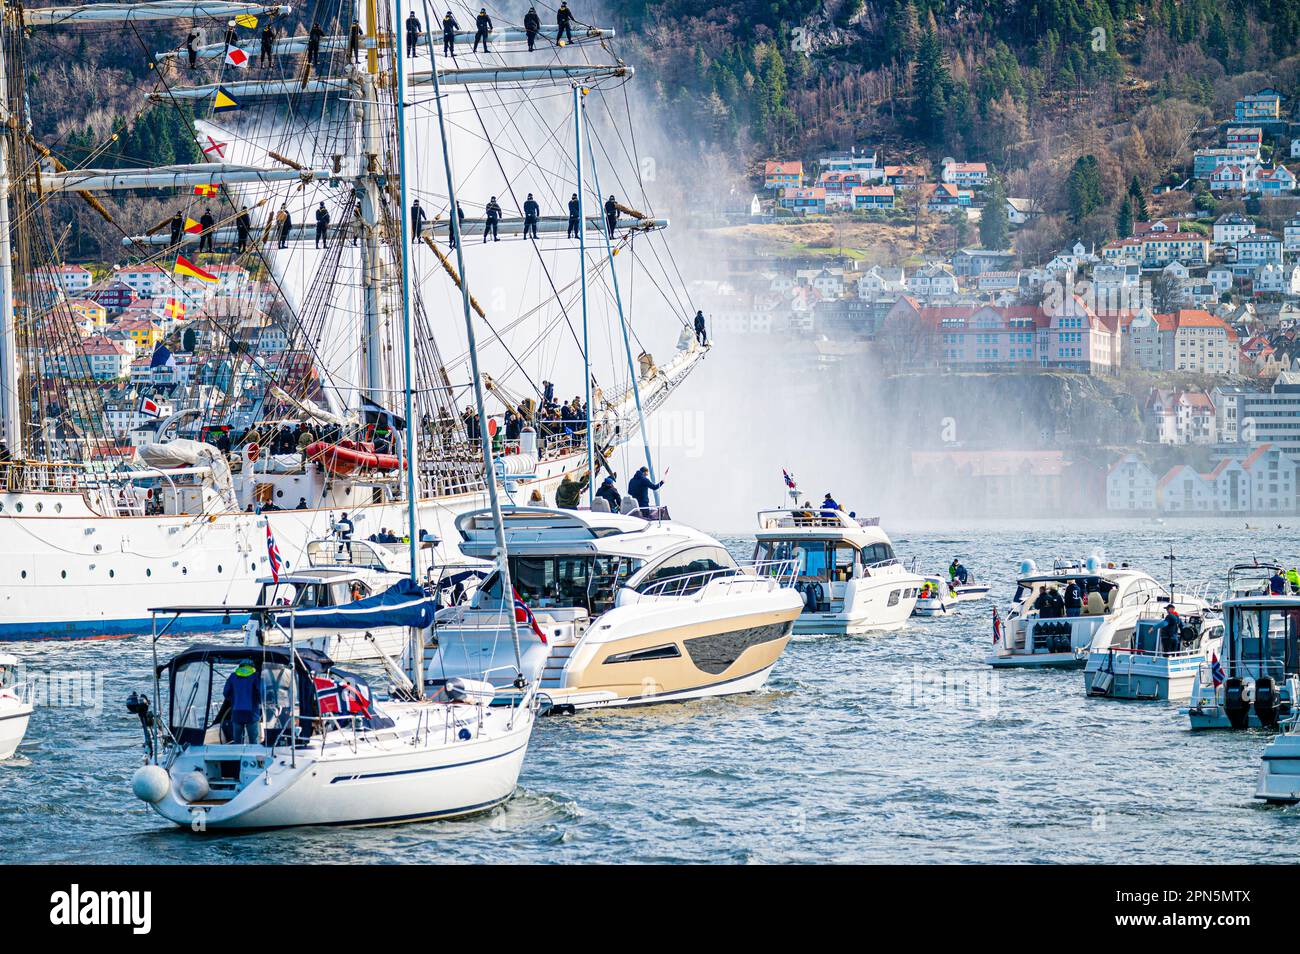 The Statsraad Lehmkuhl coming home to Bergen after 20 months at sea around the world. Stock Photo